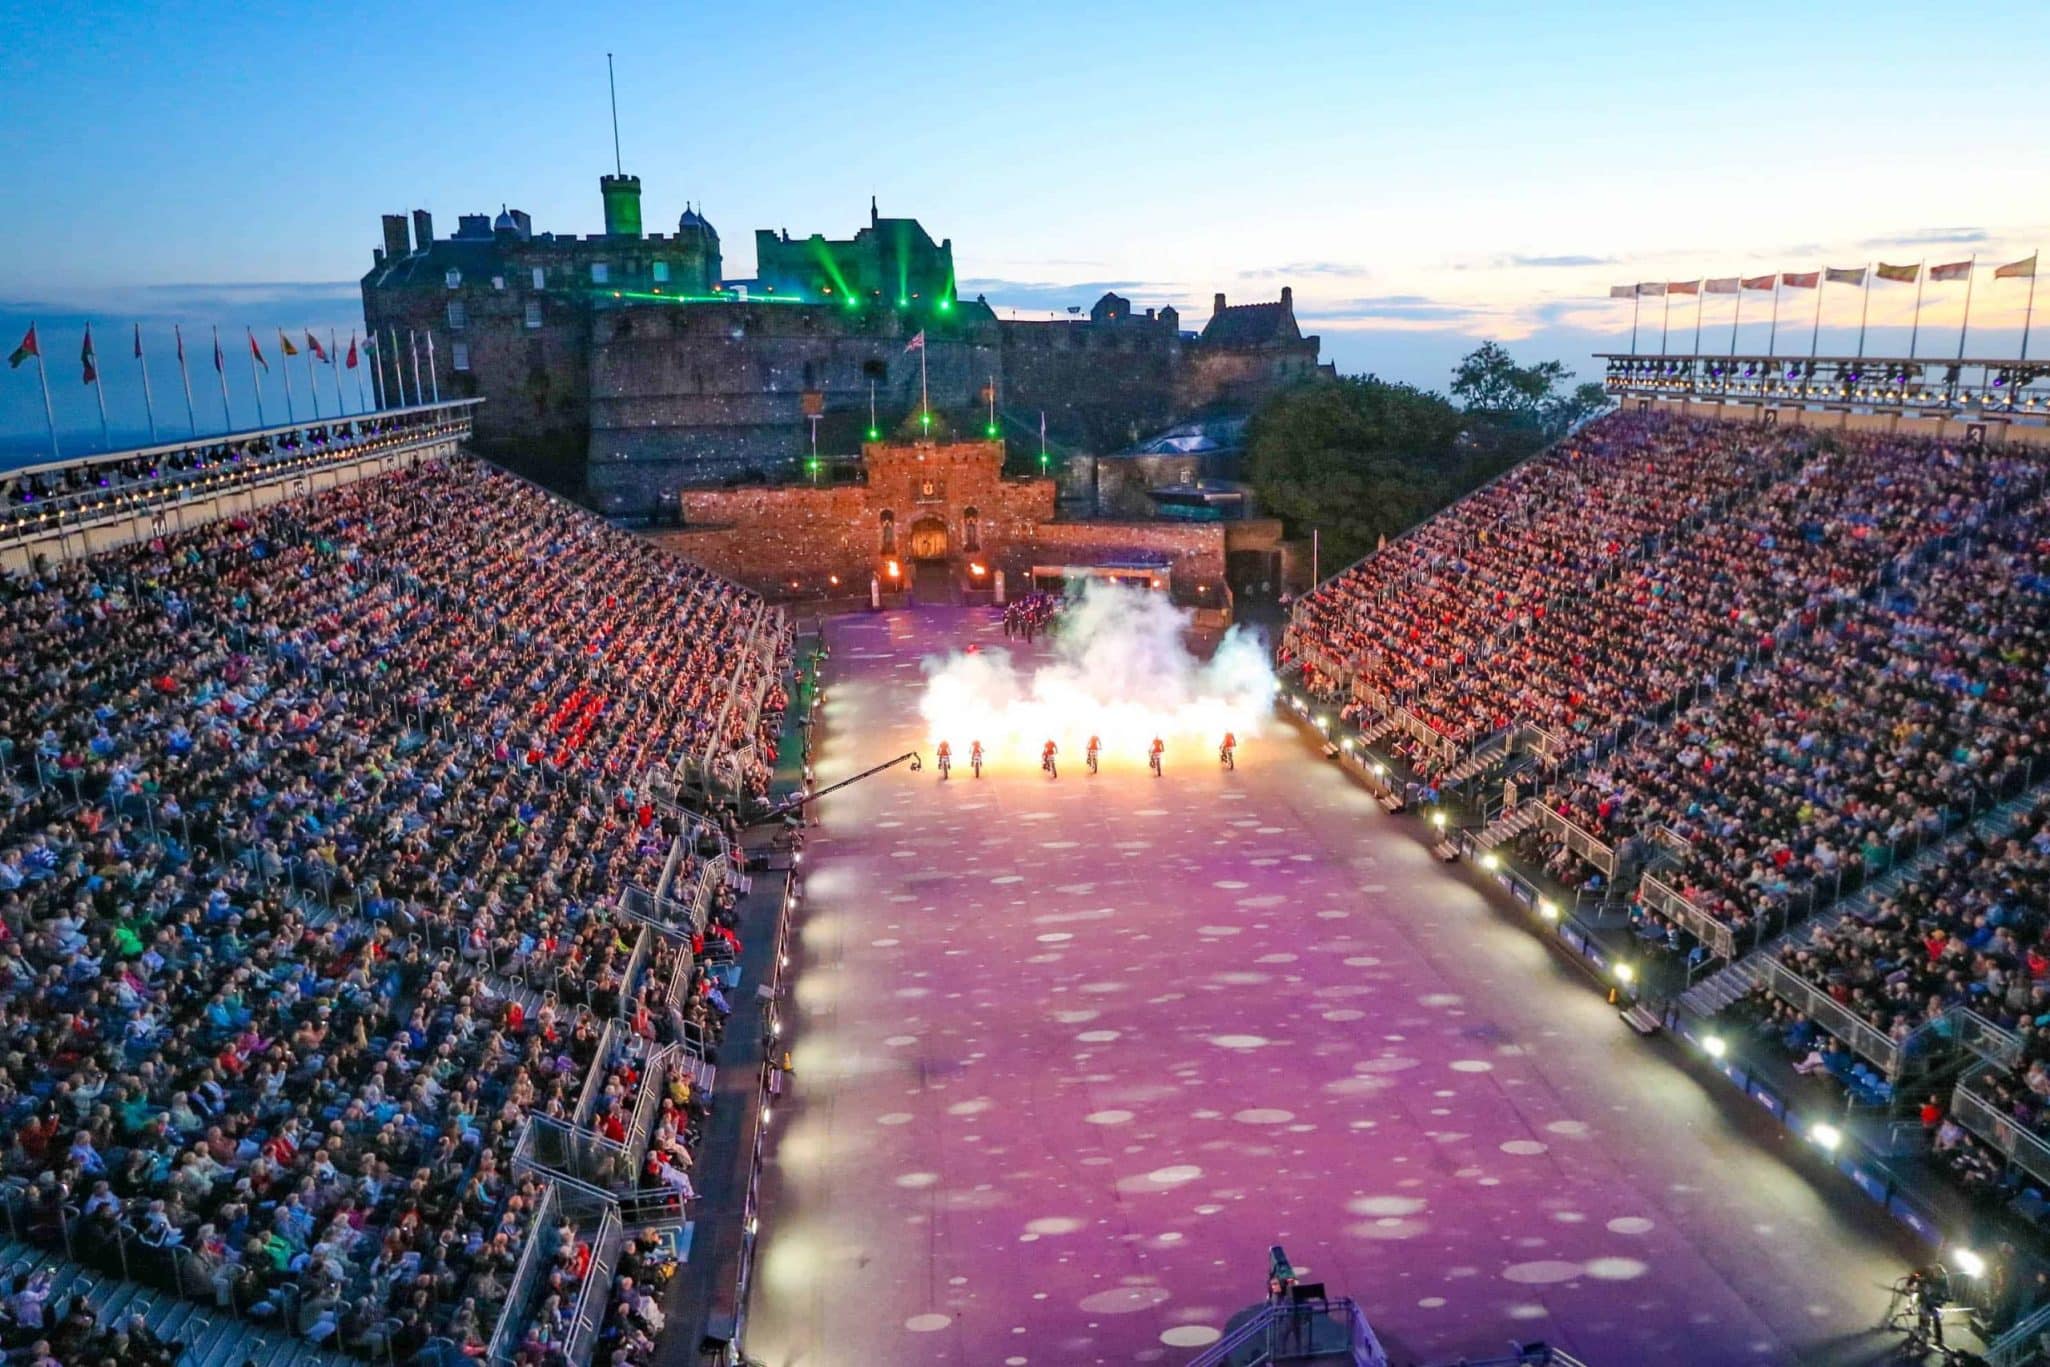 A first timer’s guide to Edinburgh Festivals in August